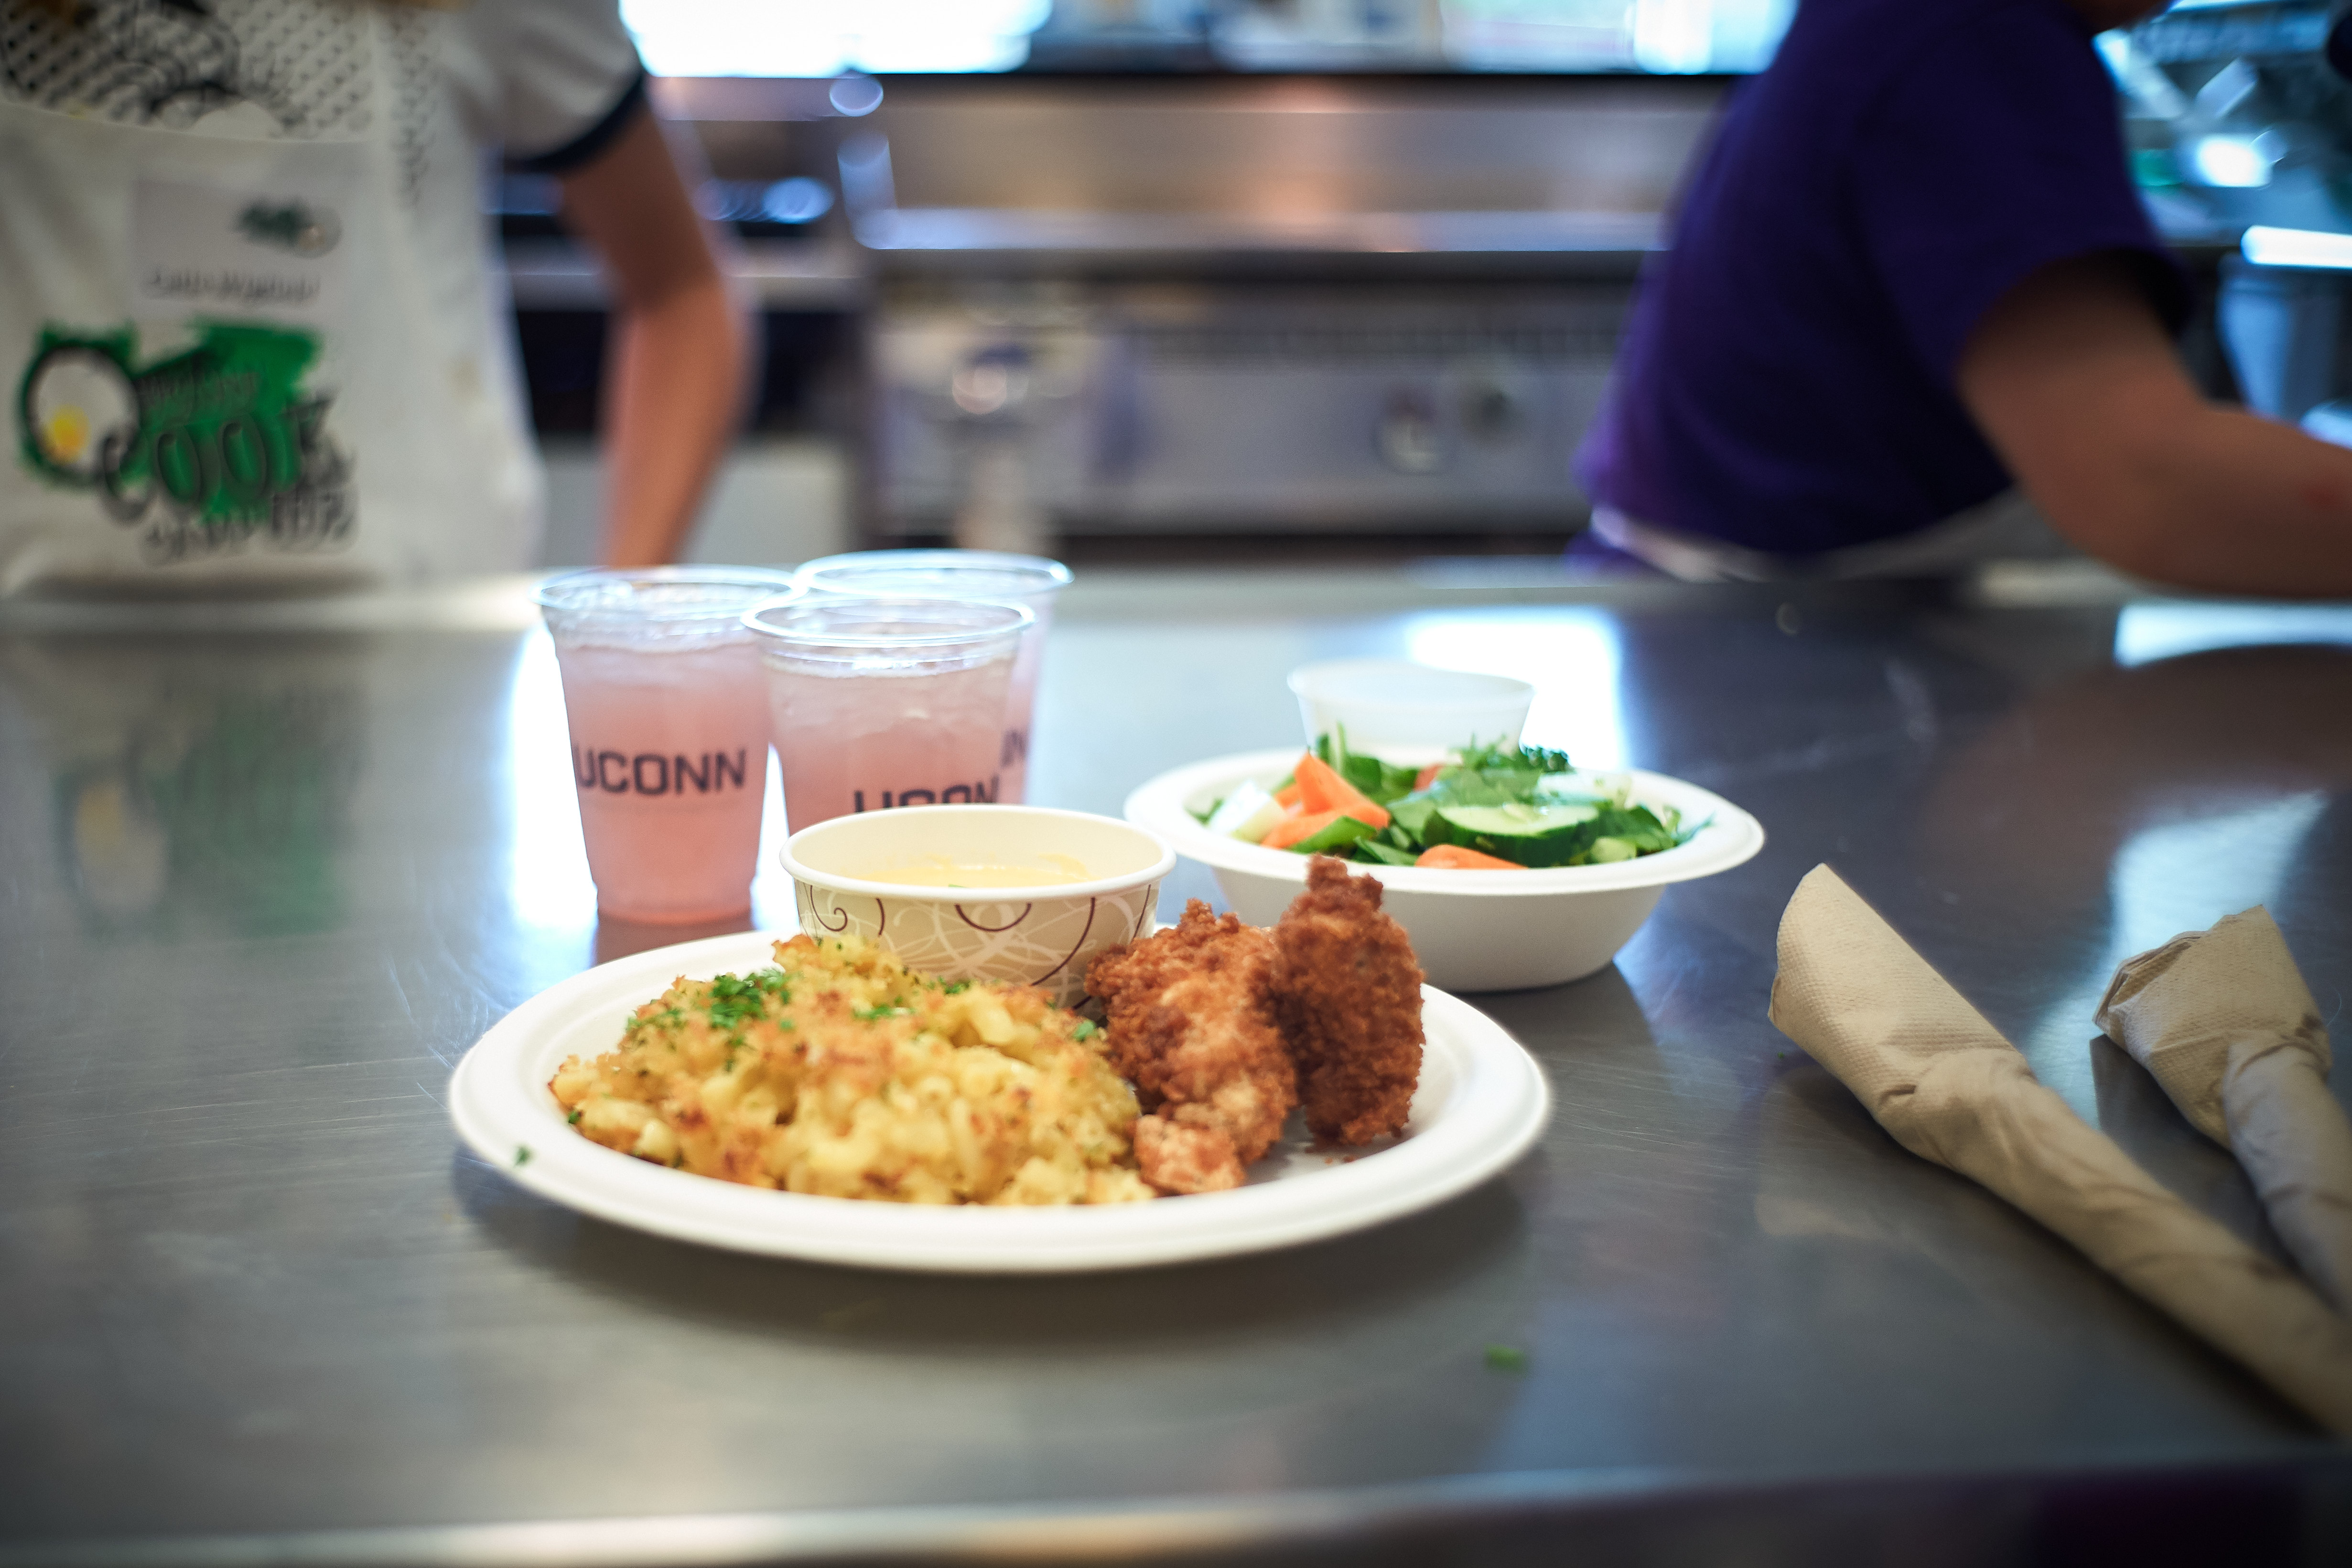 Mac 'n cheese, chicken nuggets, sauce and a vinaigrette salad was one team's entry during a competition at the UCann Cook Camp at Gelfenbien Commons on July 18, 2019. (Peter Morenus/UConn Photo)